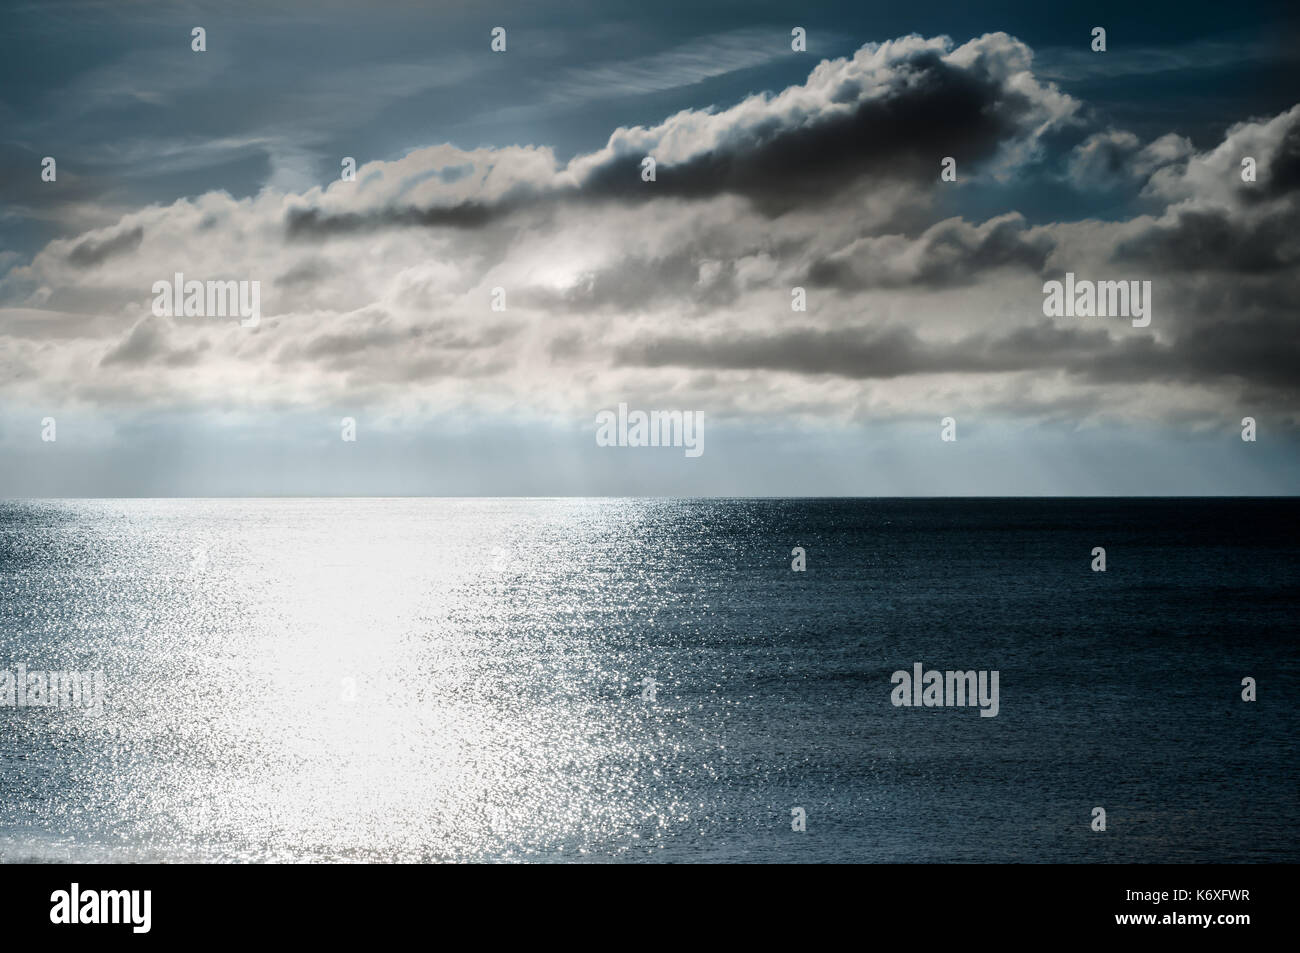 Seascape at dusk, with grey clouds in a dark moody sky and sunlight rays shining and scattering on dark blue water. Stock Photo